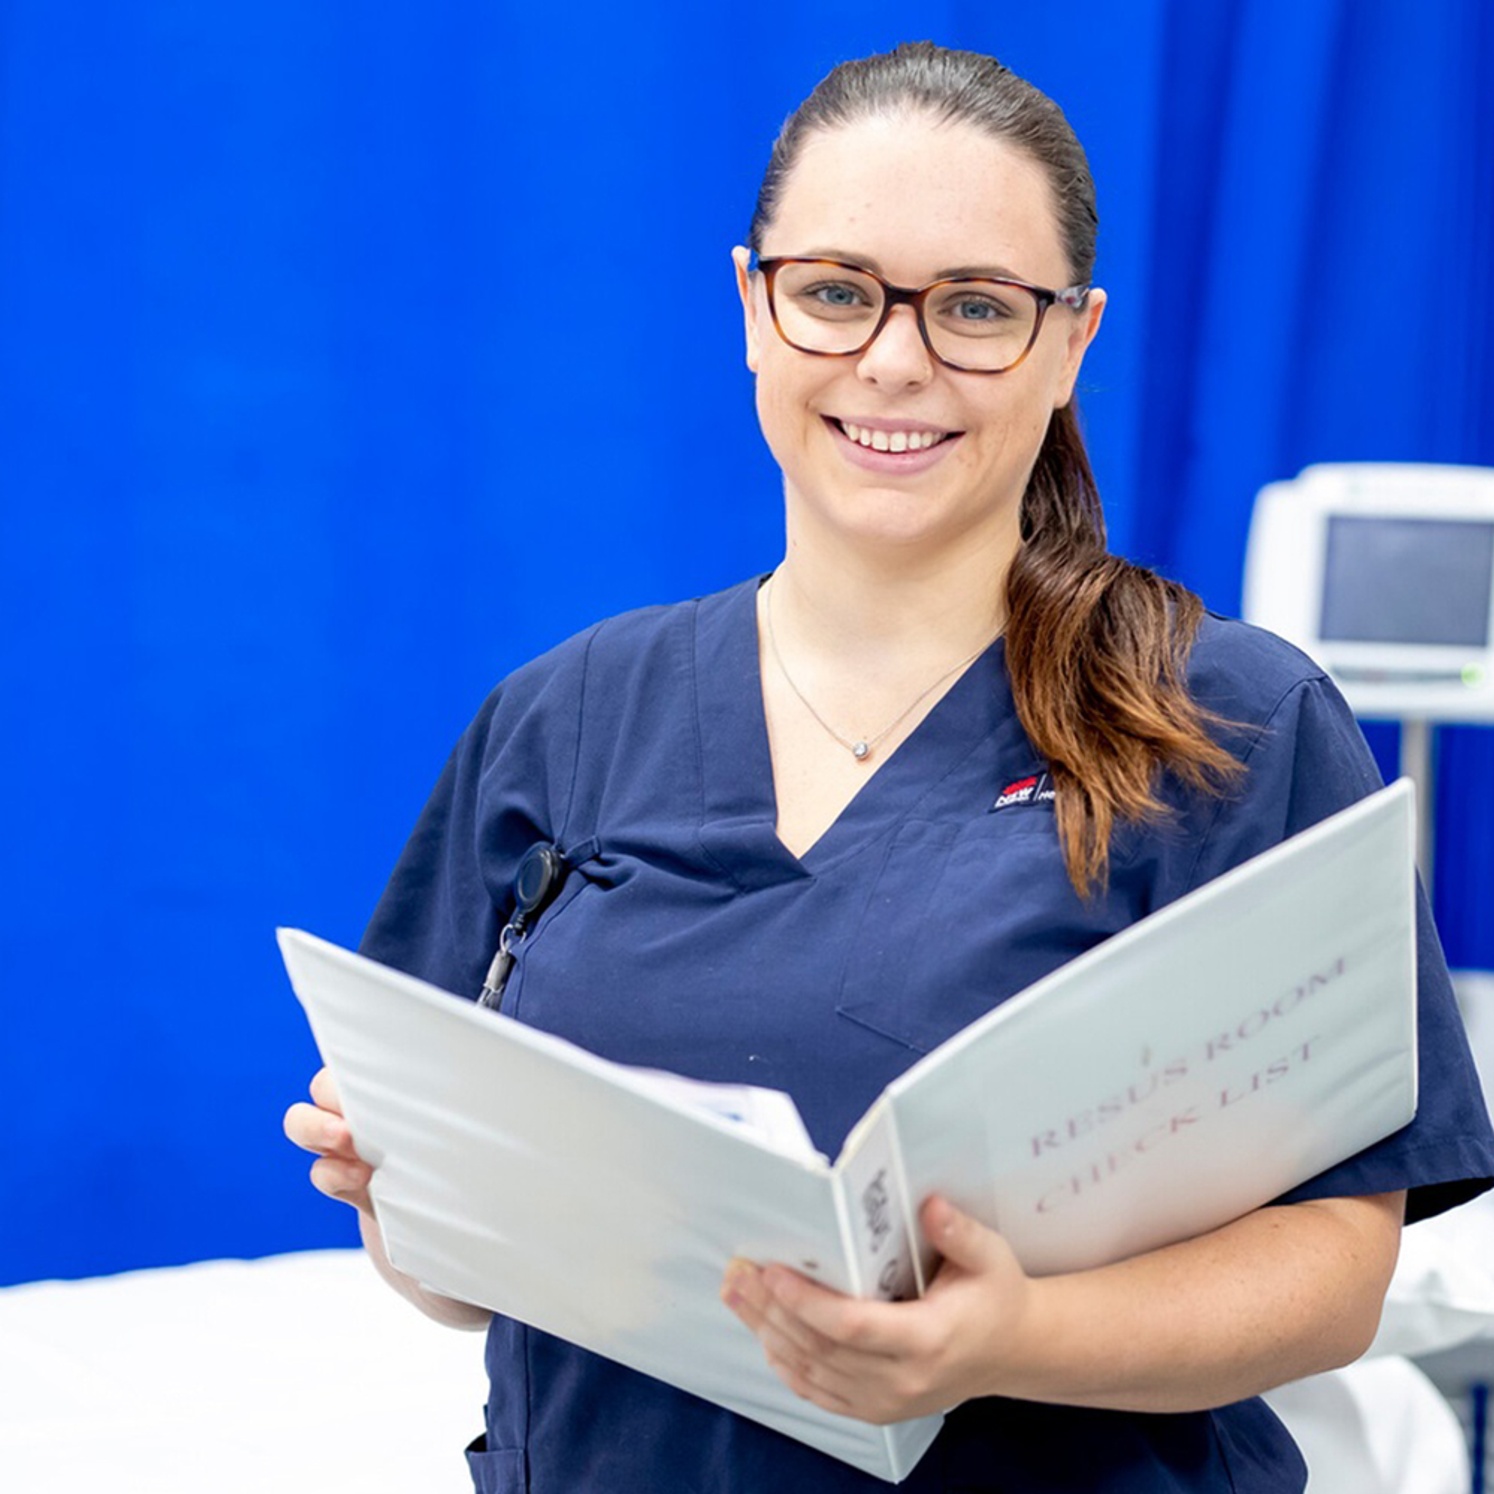 Ashleigh Woods graduated with the Bachelor of Nursing in 2015 and the completed postgraduate studies in midwifery at another university. She works as a nurse at The Tweed Hospital’s emergency department and Women’s Care Unit, helping to deliver babies.